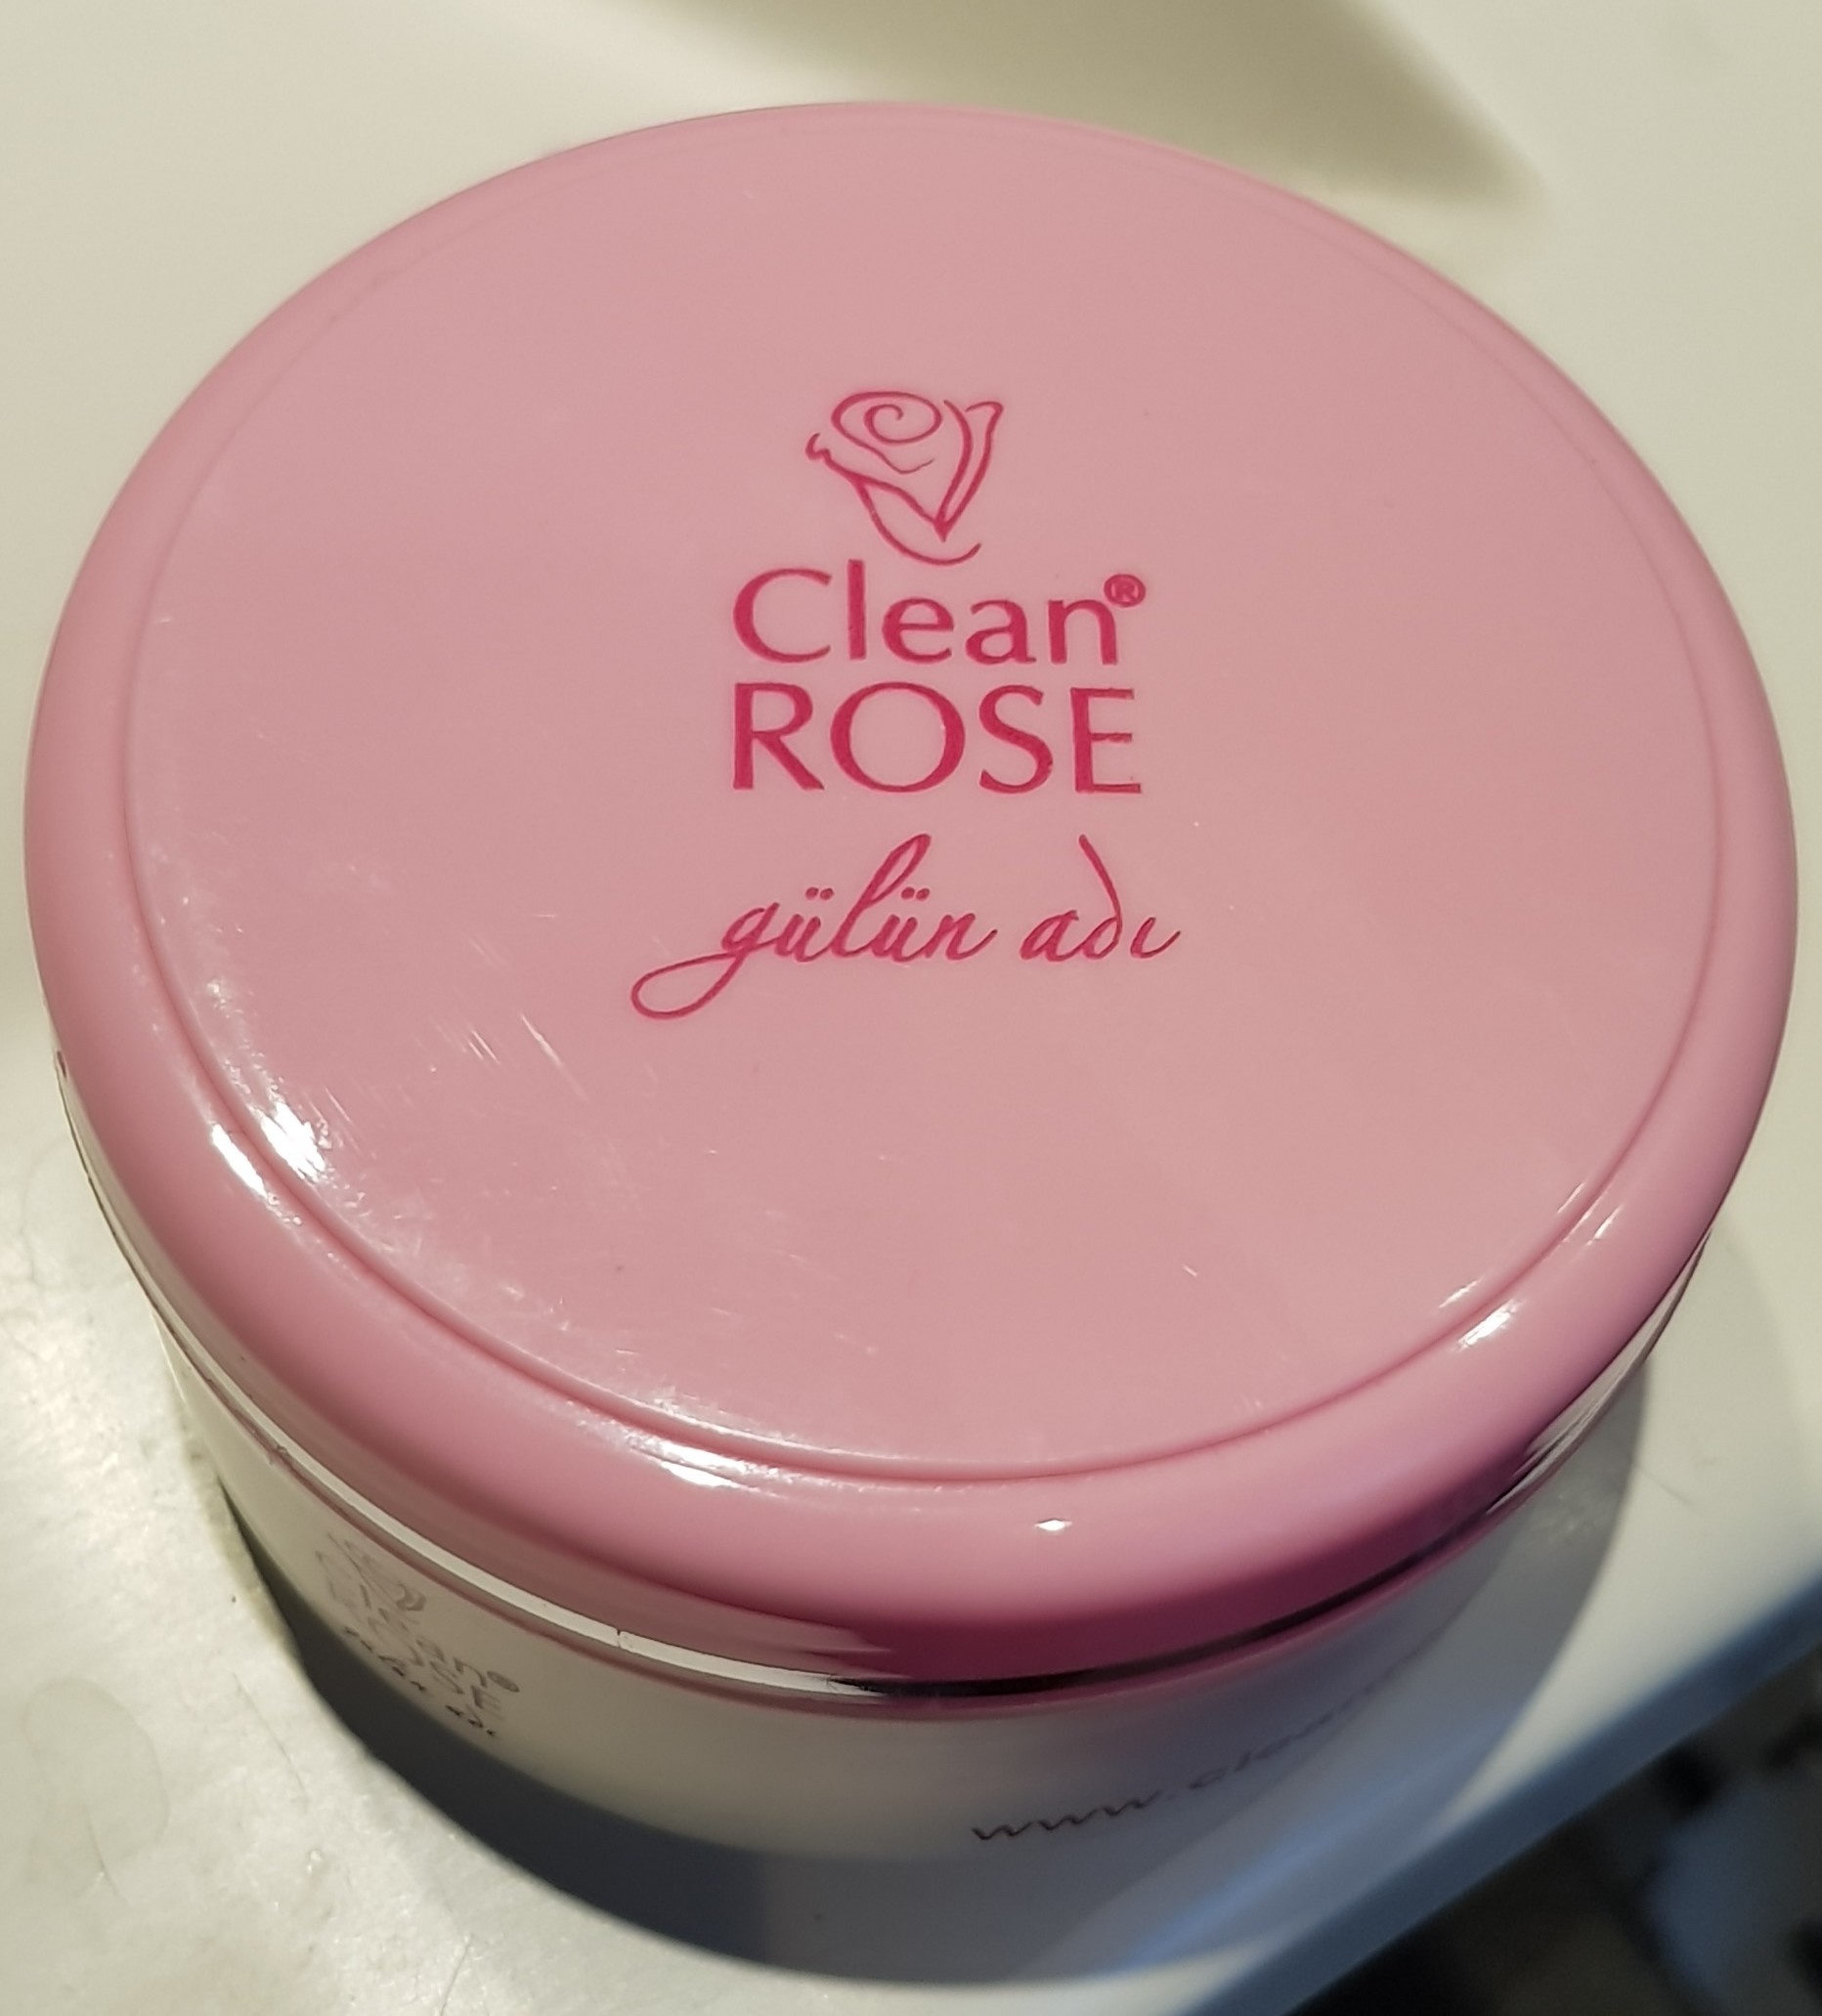 Clean ROSE - Product - tr